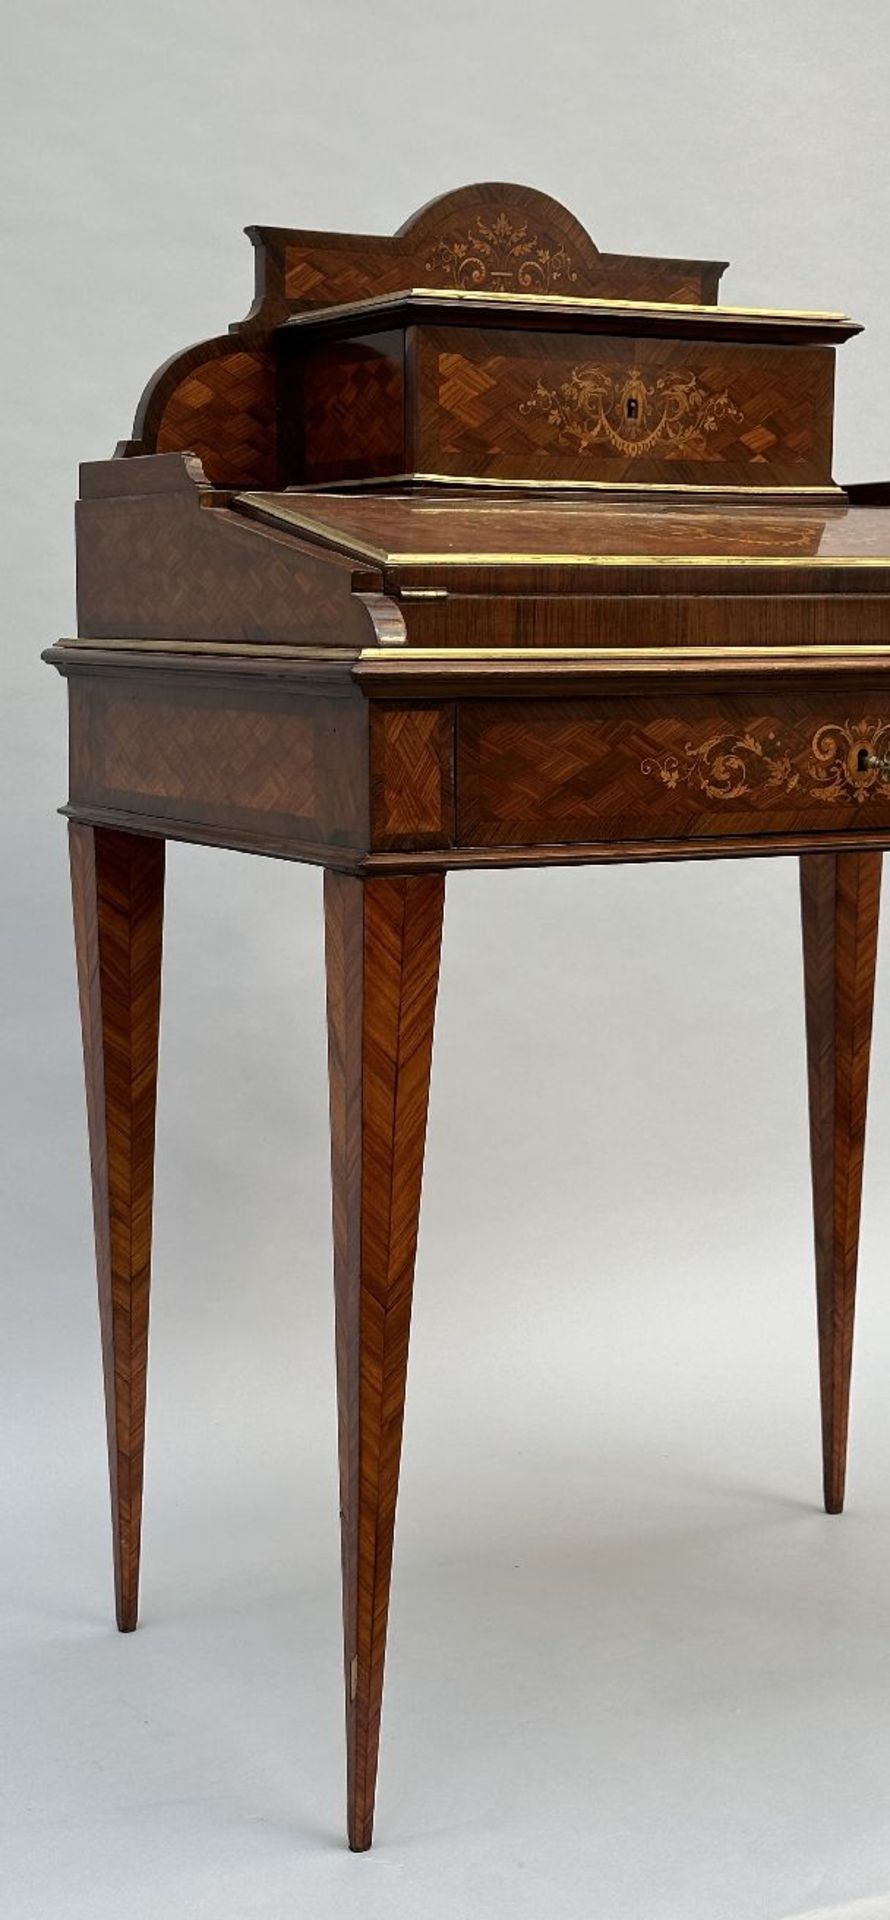 A Louis XVI style desk with inlaywork, 19th century - Image 3 of 5